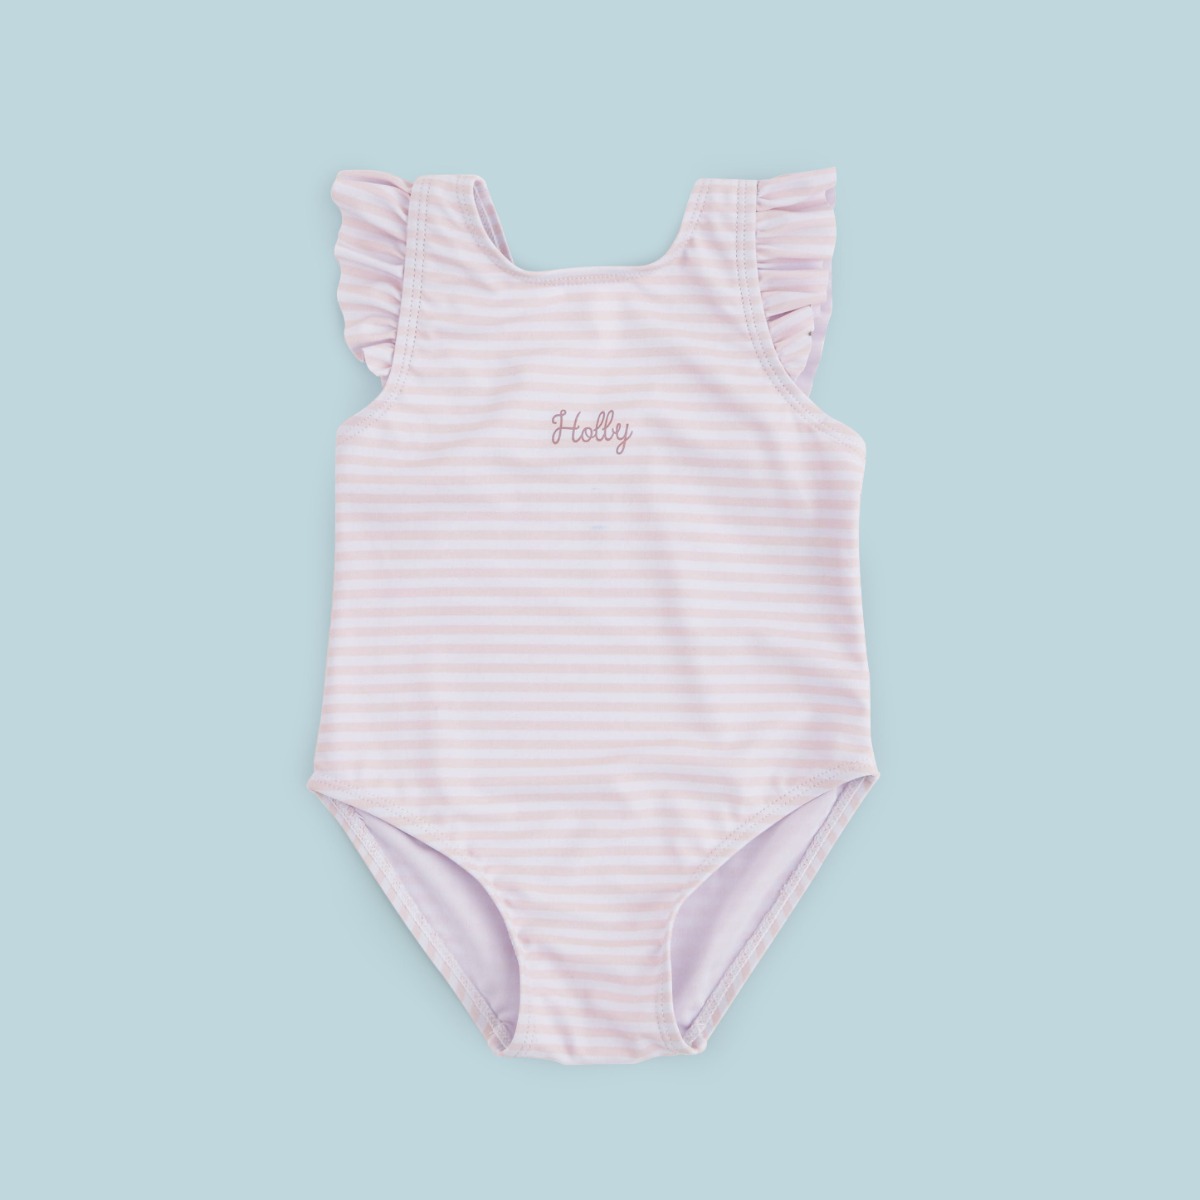 Image of Personalised Pink Striped Swimming Costume